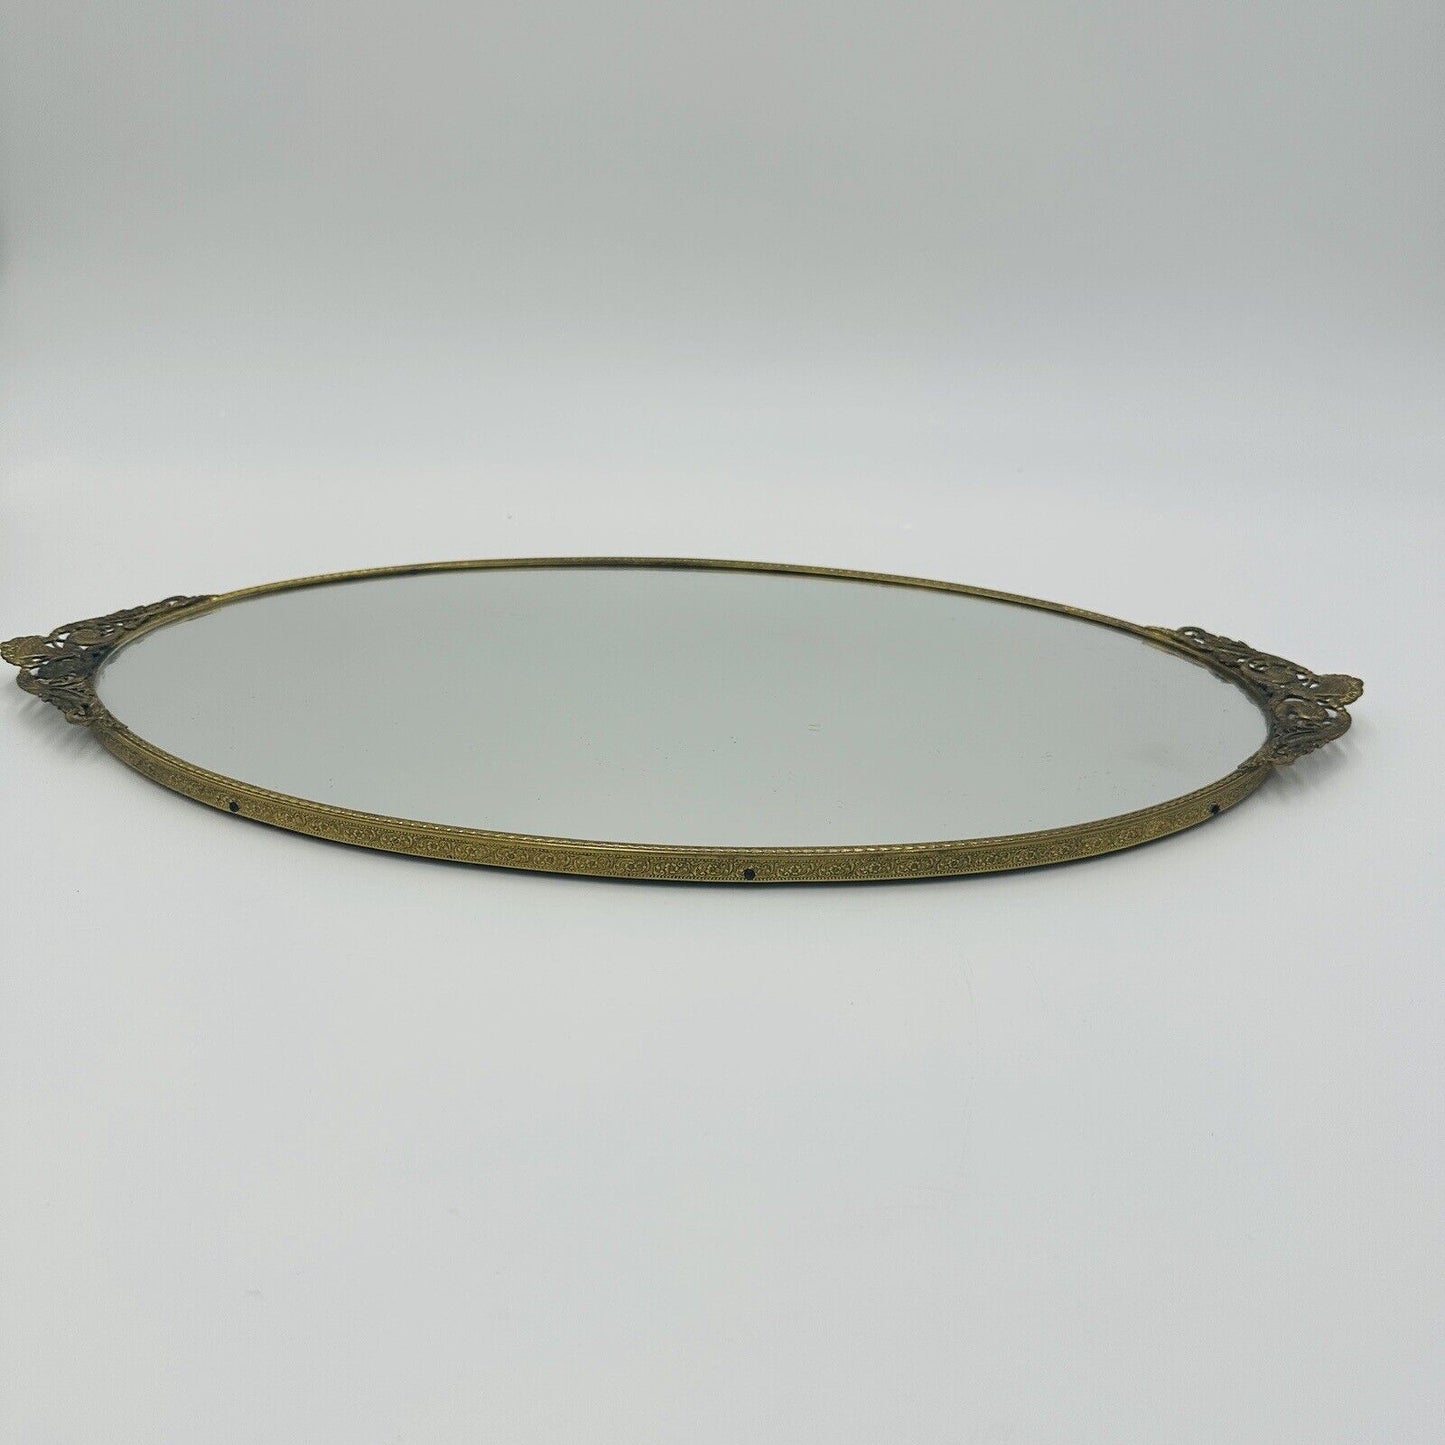 Mirror Art Deco Gilt Brass Wall Vintage Oval  8in W x 17in H Jewerly Display